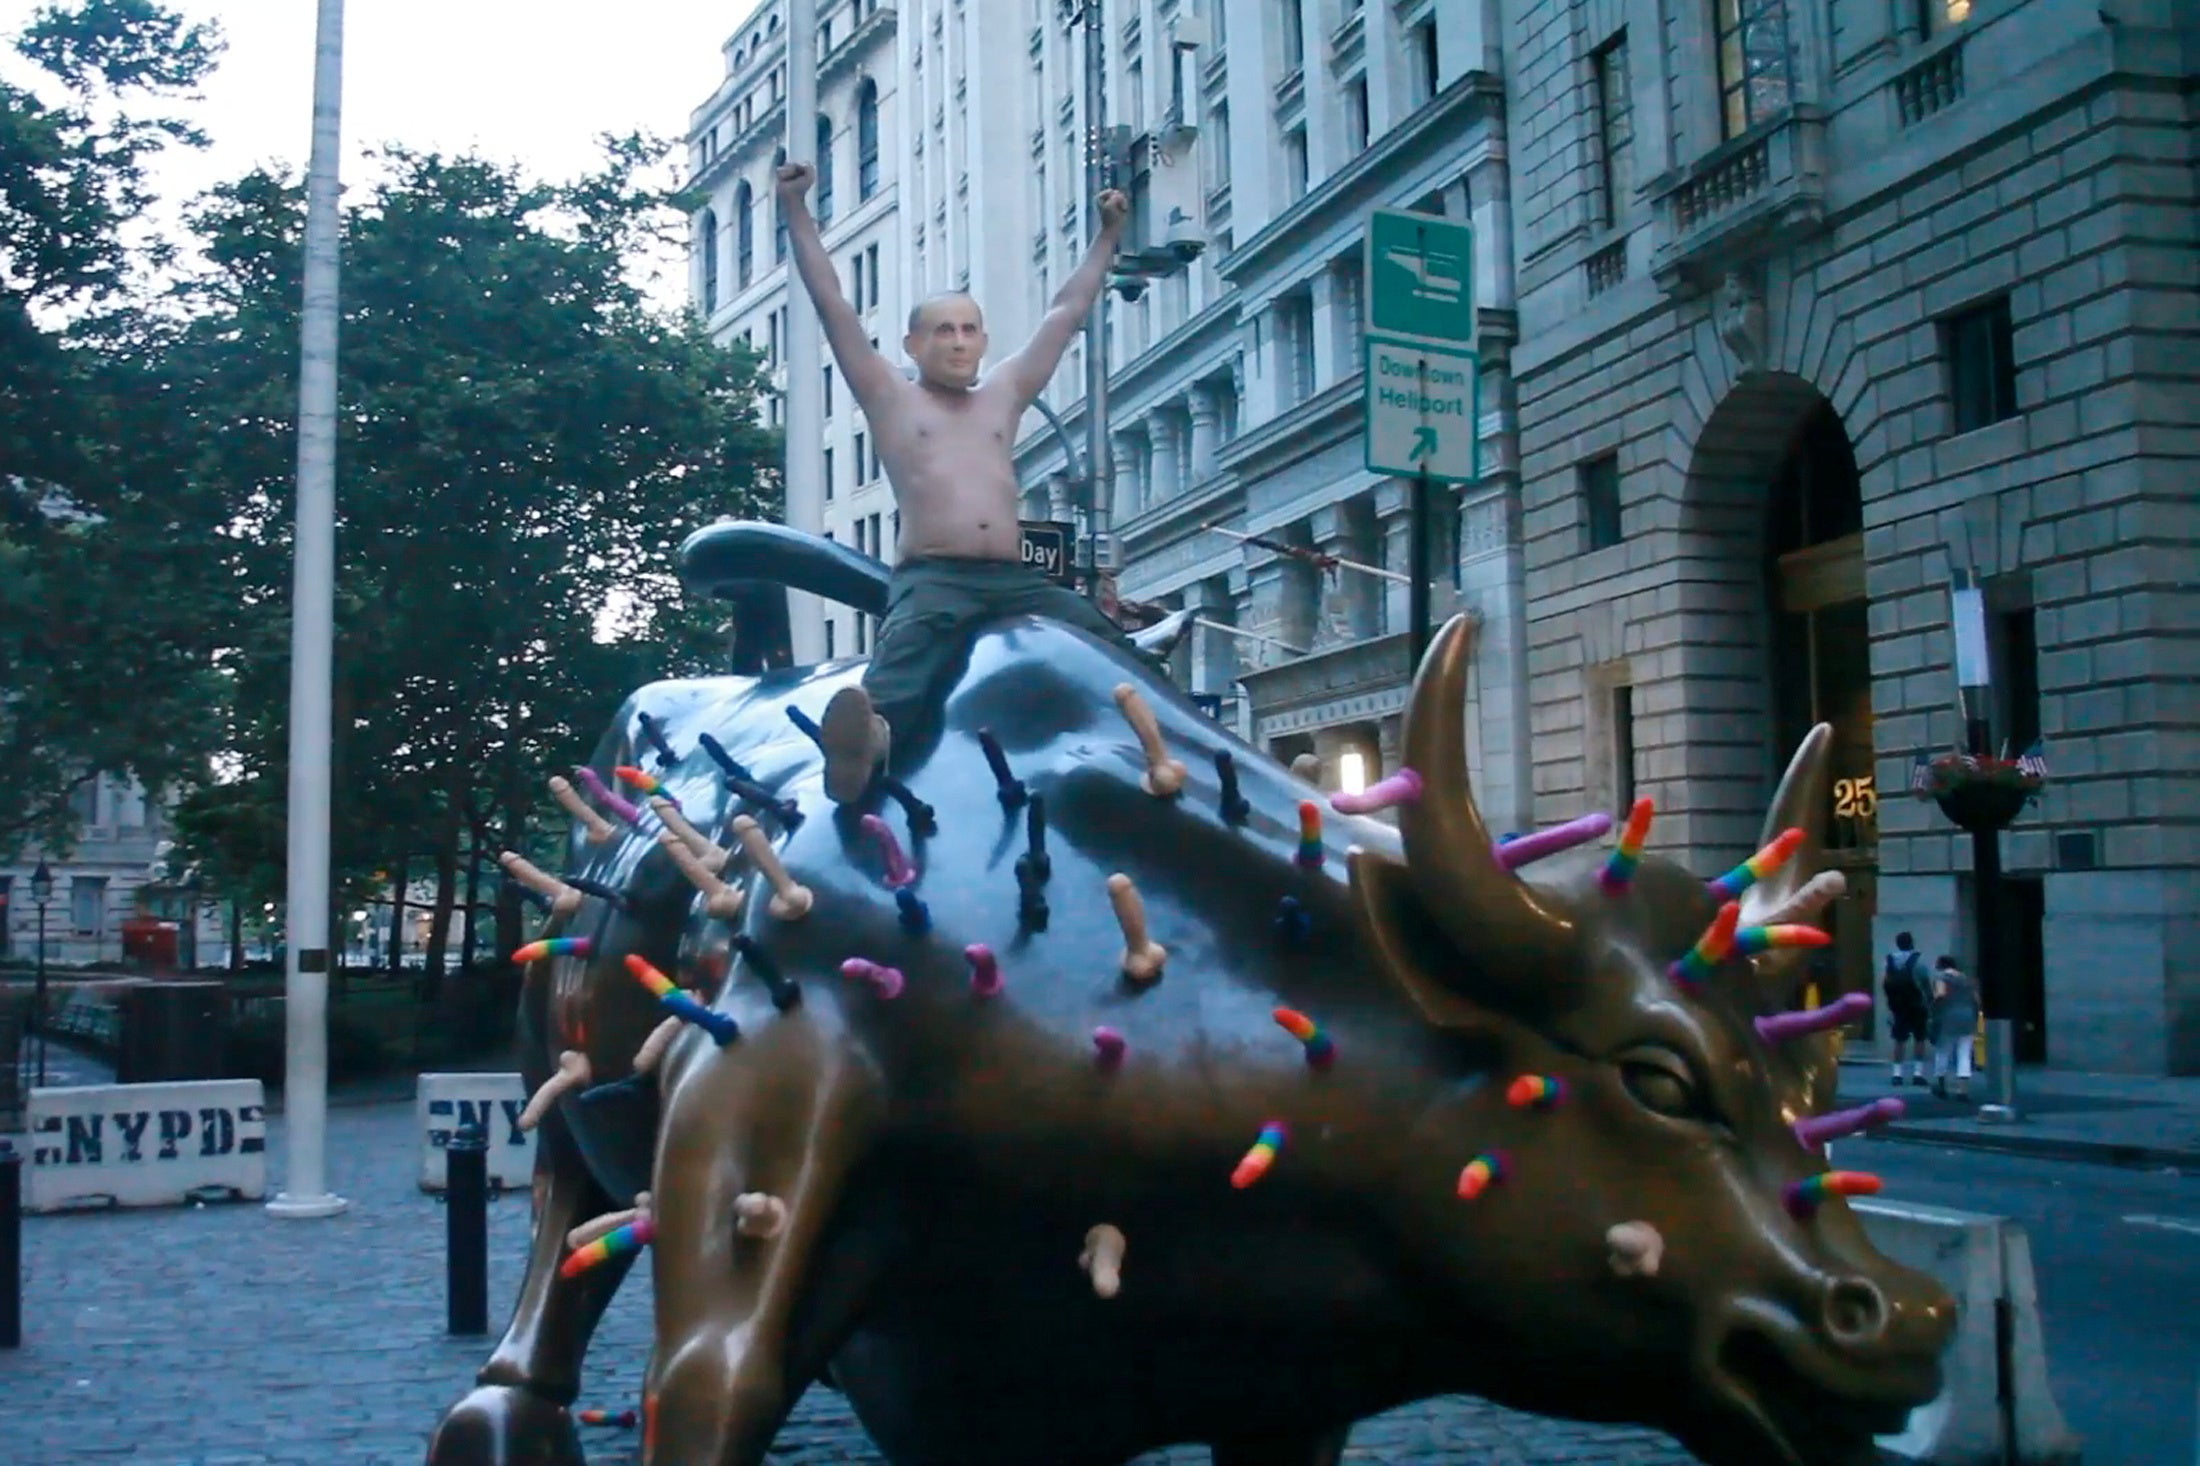 Activist Jeff Jetton, bare chested and wearing a mask to portray Russia's President Vladimir Putin, sits on the Wall Street bull sculpture covered with sex toys in a still image from video taken in New York City, U.S. July 16, 2018.